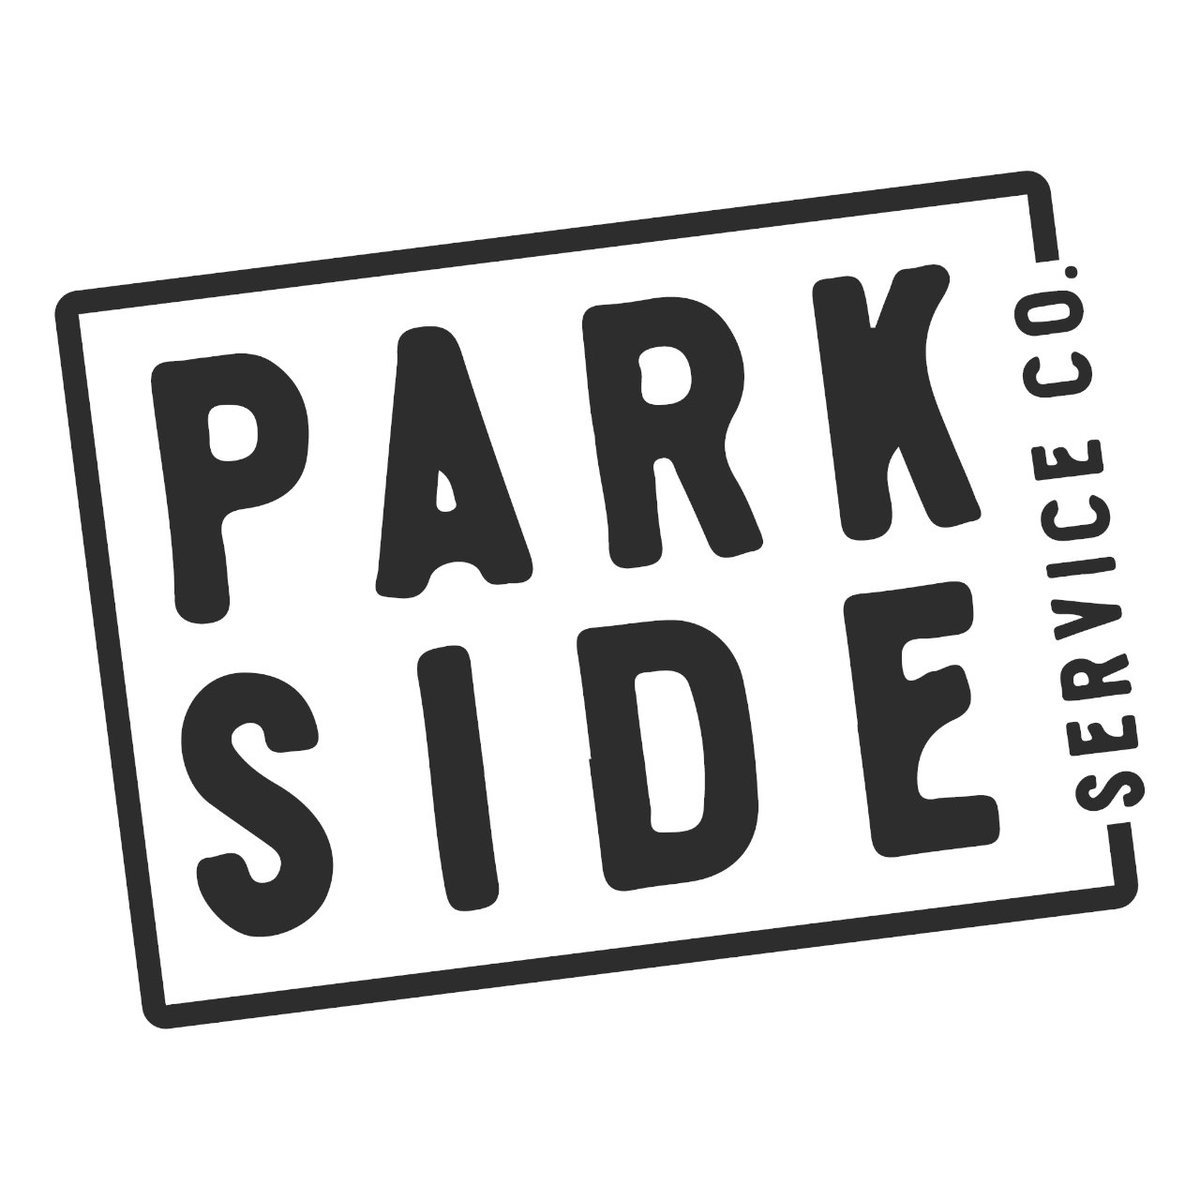 Back at Parkside SRQ TONIGHT - 5/2 6-9 PM. Great Heights Ice Cream and Arts & Central open for business. Swing on by! #deanjohanesen #circusswing #hotclubjazz #matonguitars #livemusic #originalmusic #sarasota #swingonby #parksidesrq #ArtsAndCentral #greatheightscreamery